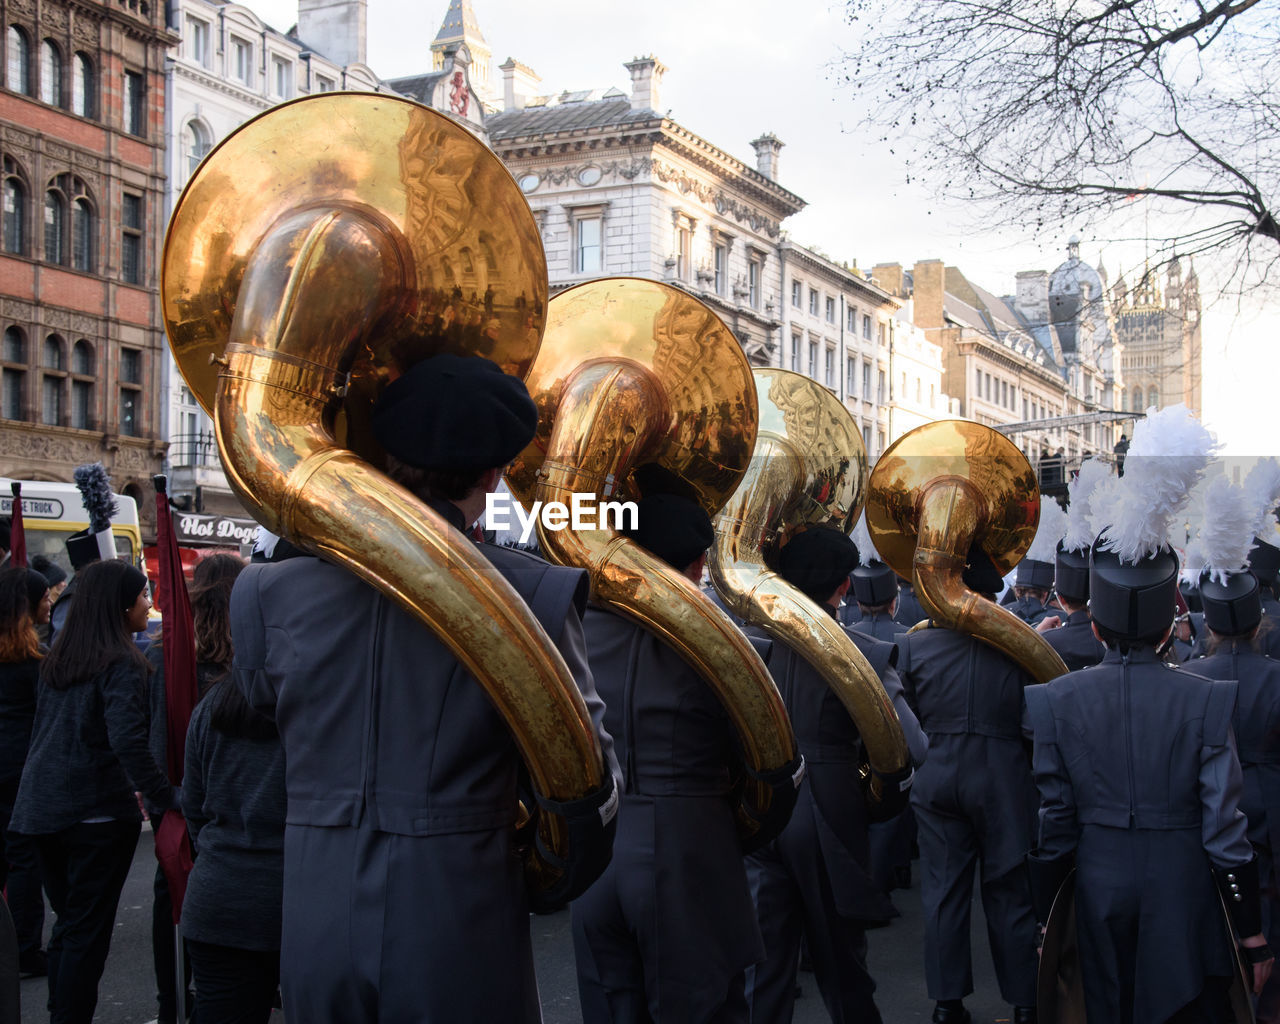 Sousaphone players in a new year parade